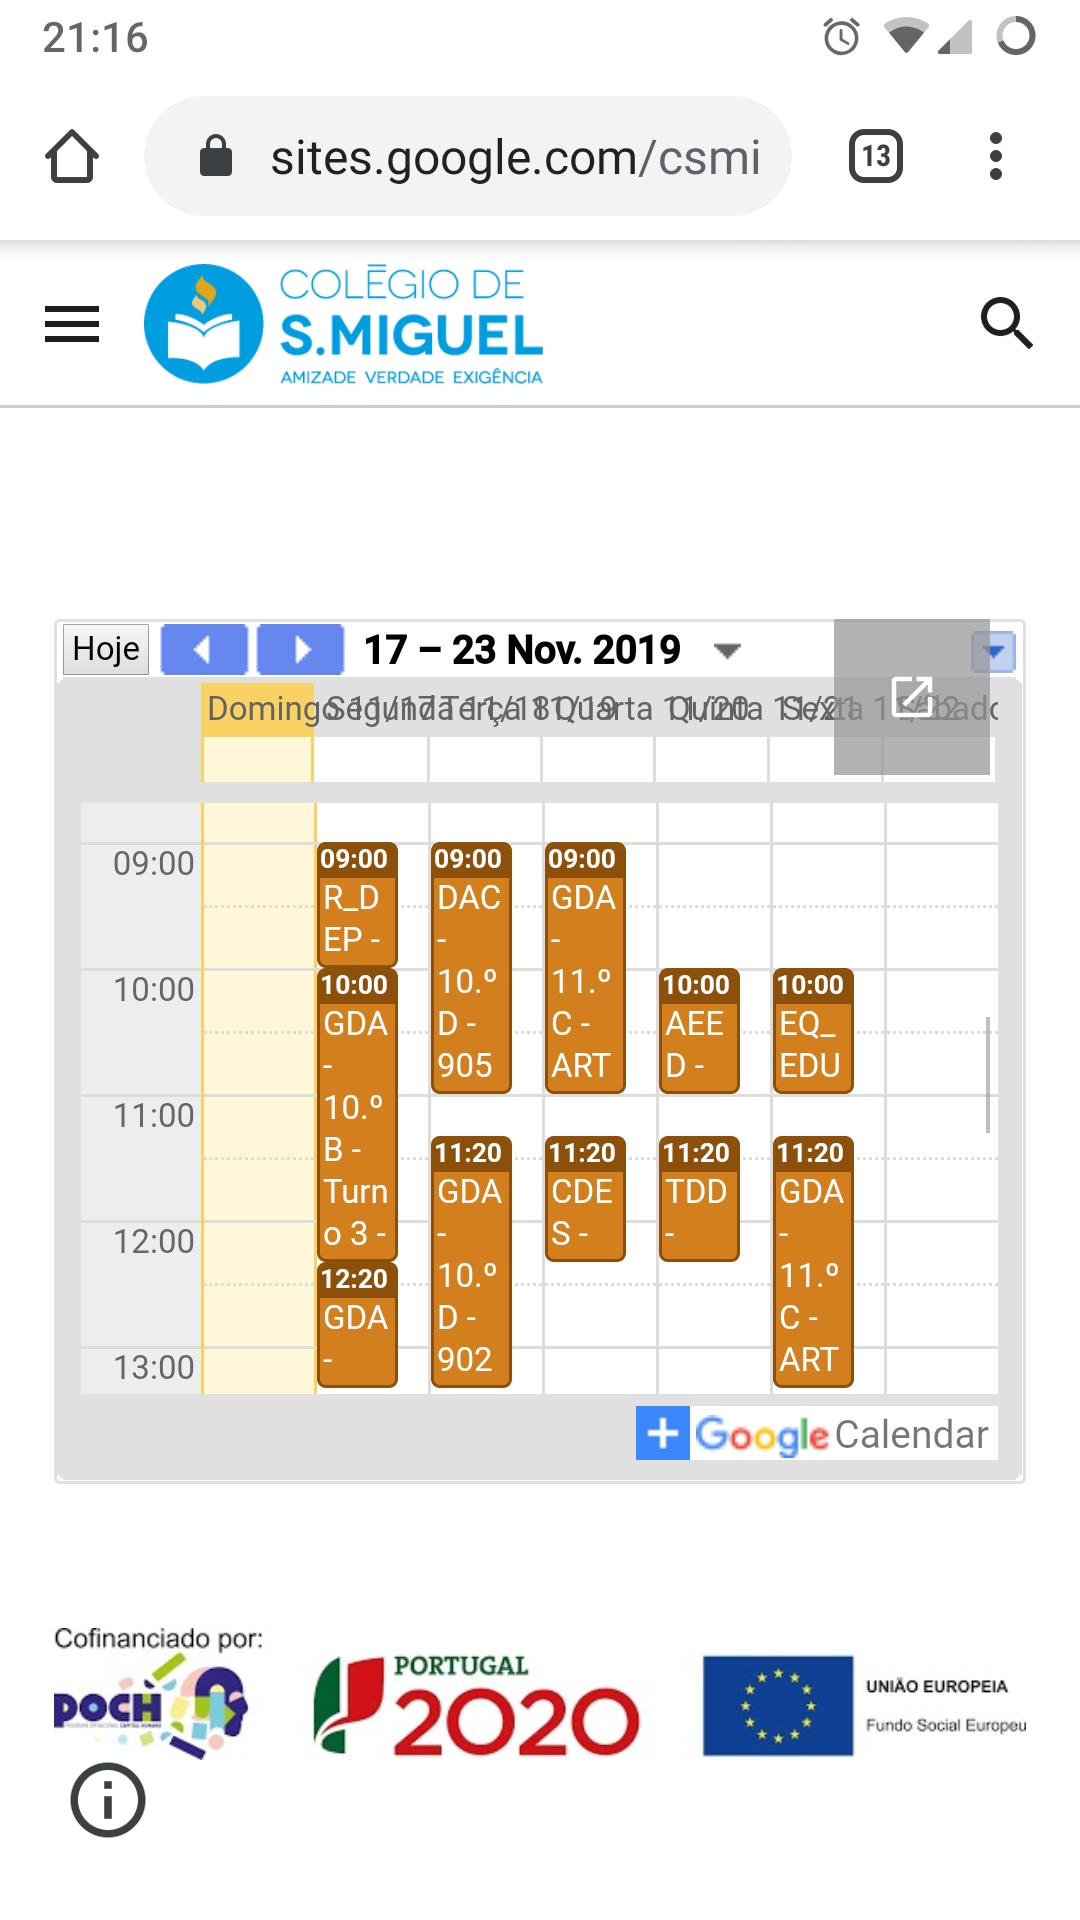 How Can I Embed A Google Calendar On Google Sites Without